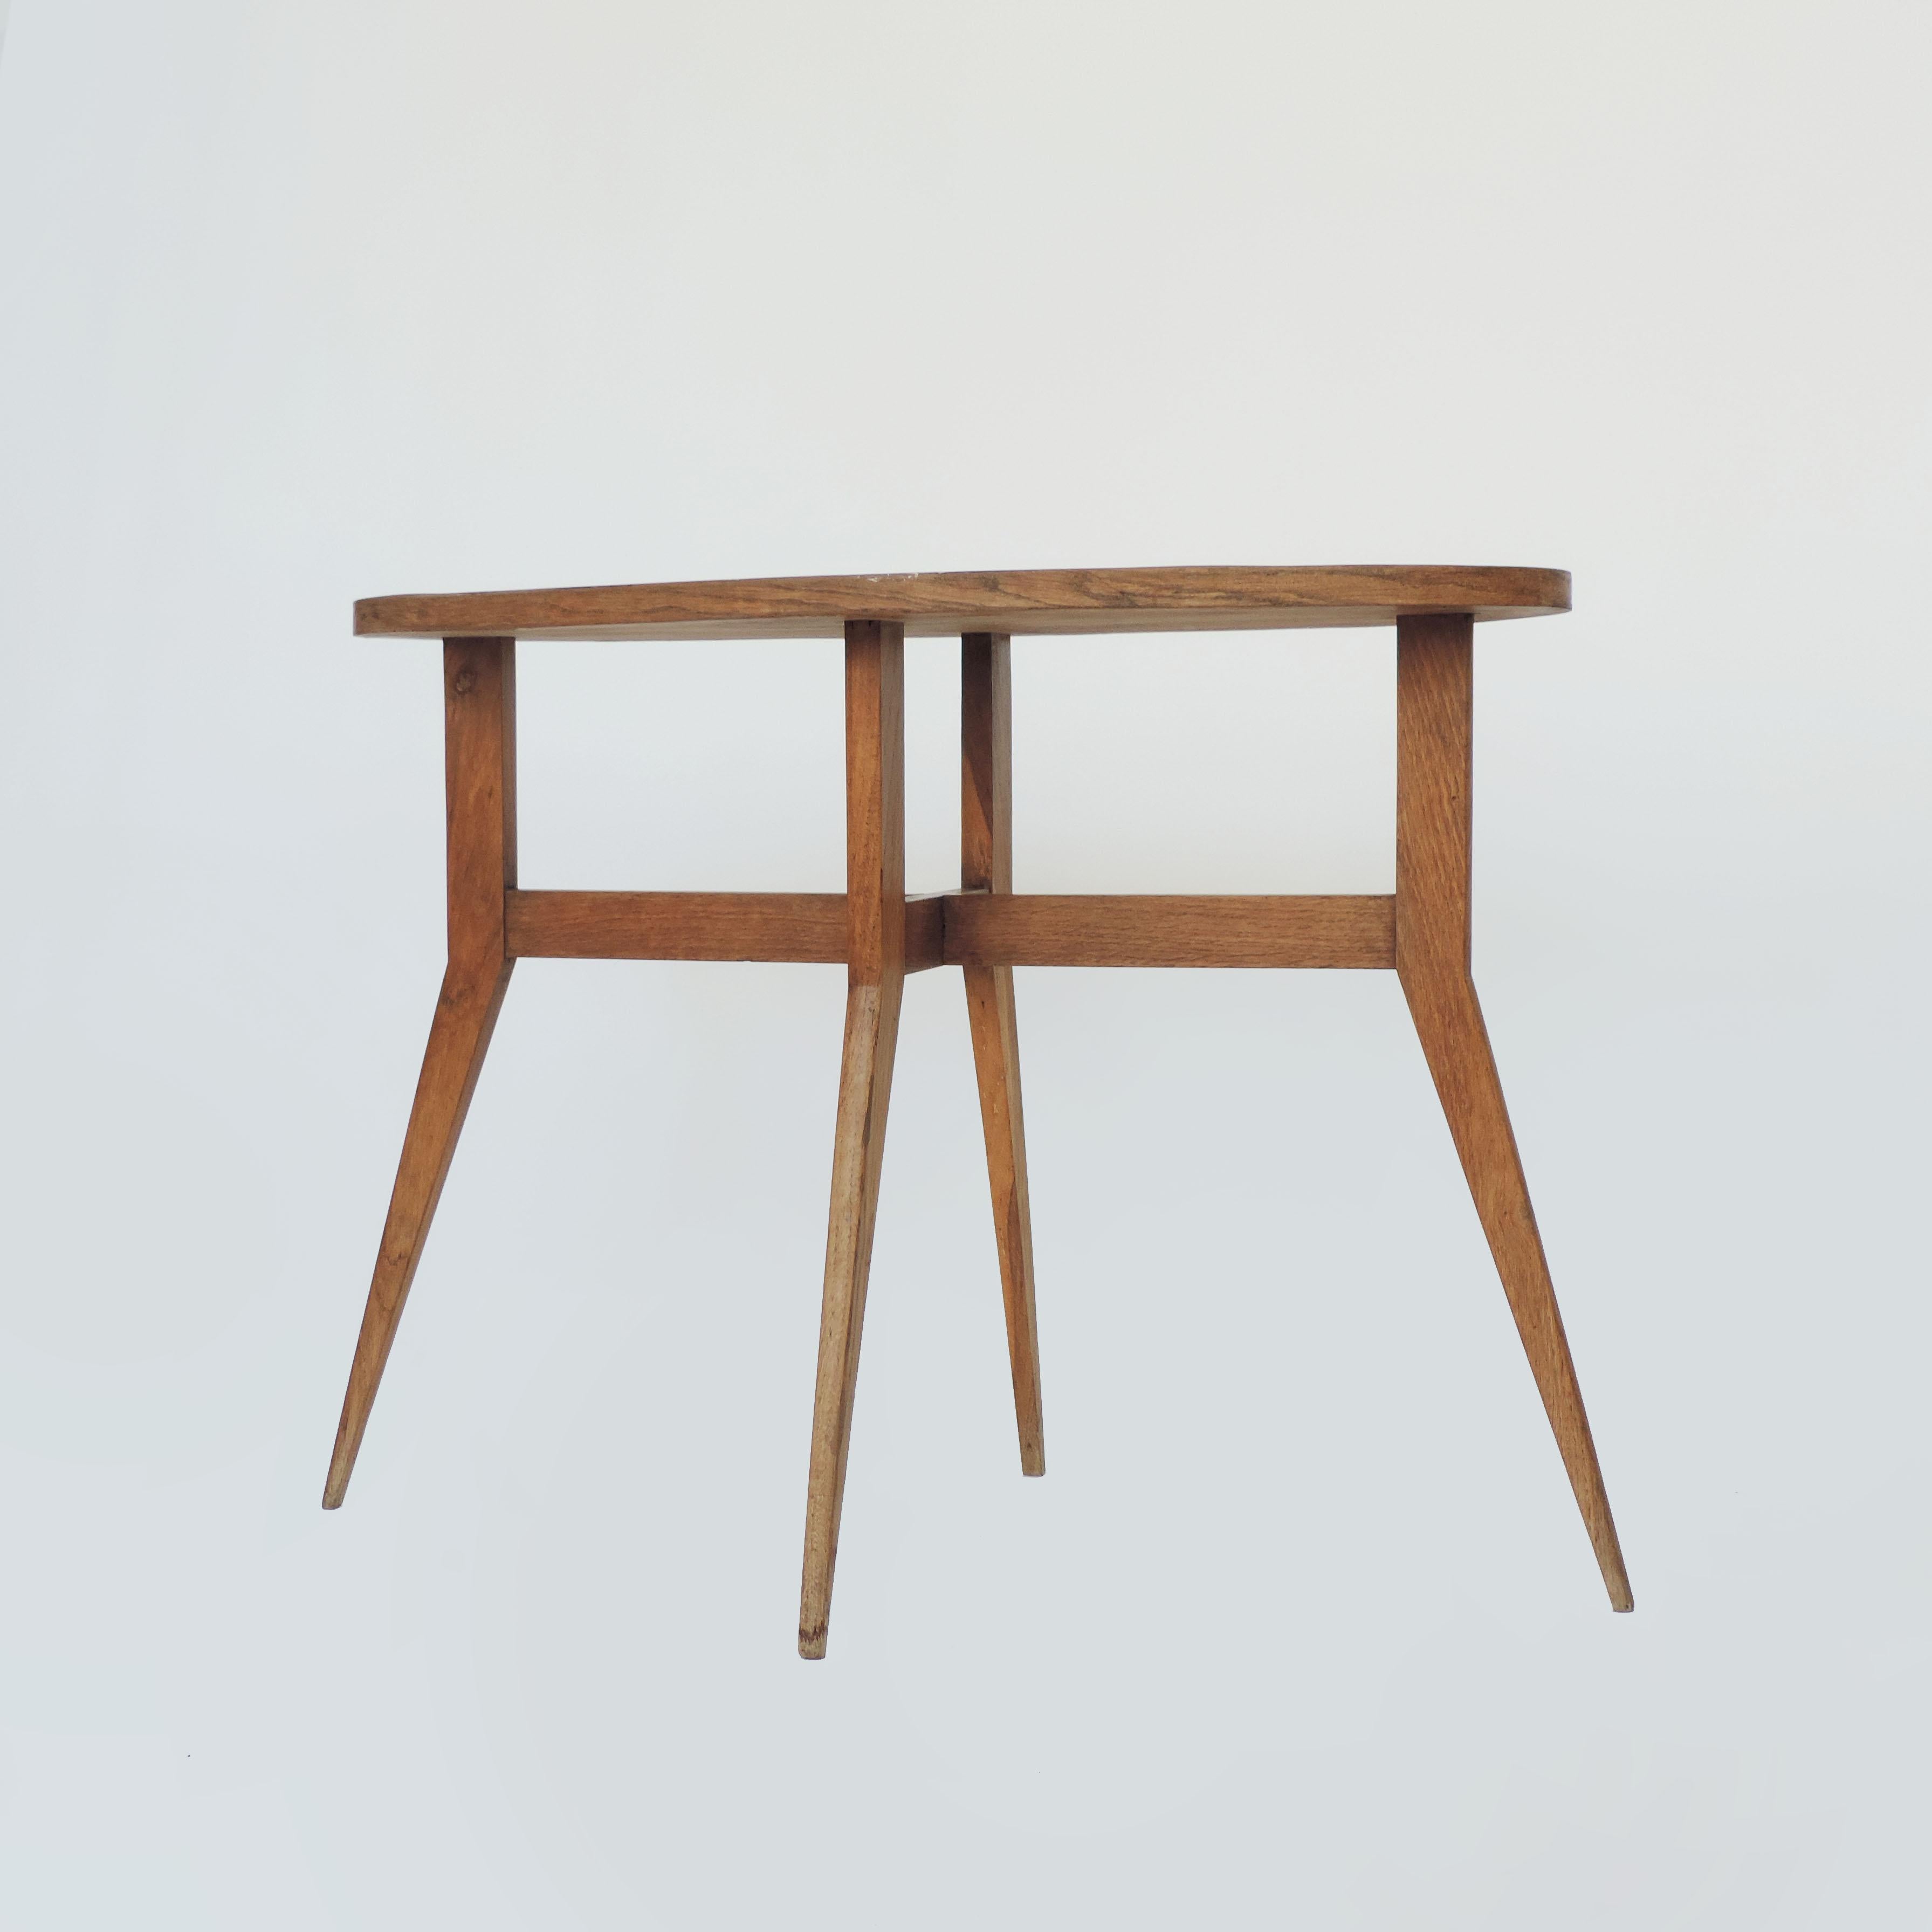 Mid-20th Century Italian Midcentury Side Table Attributed to Gio Ponti